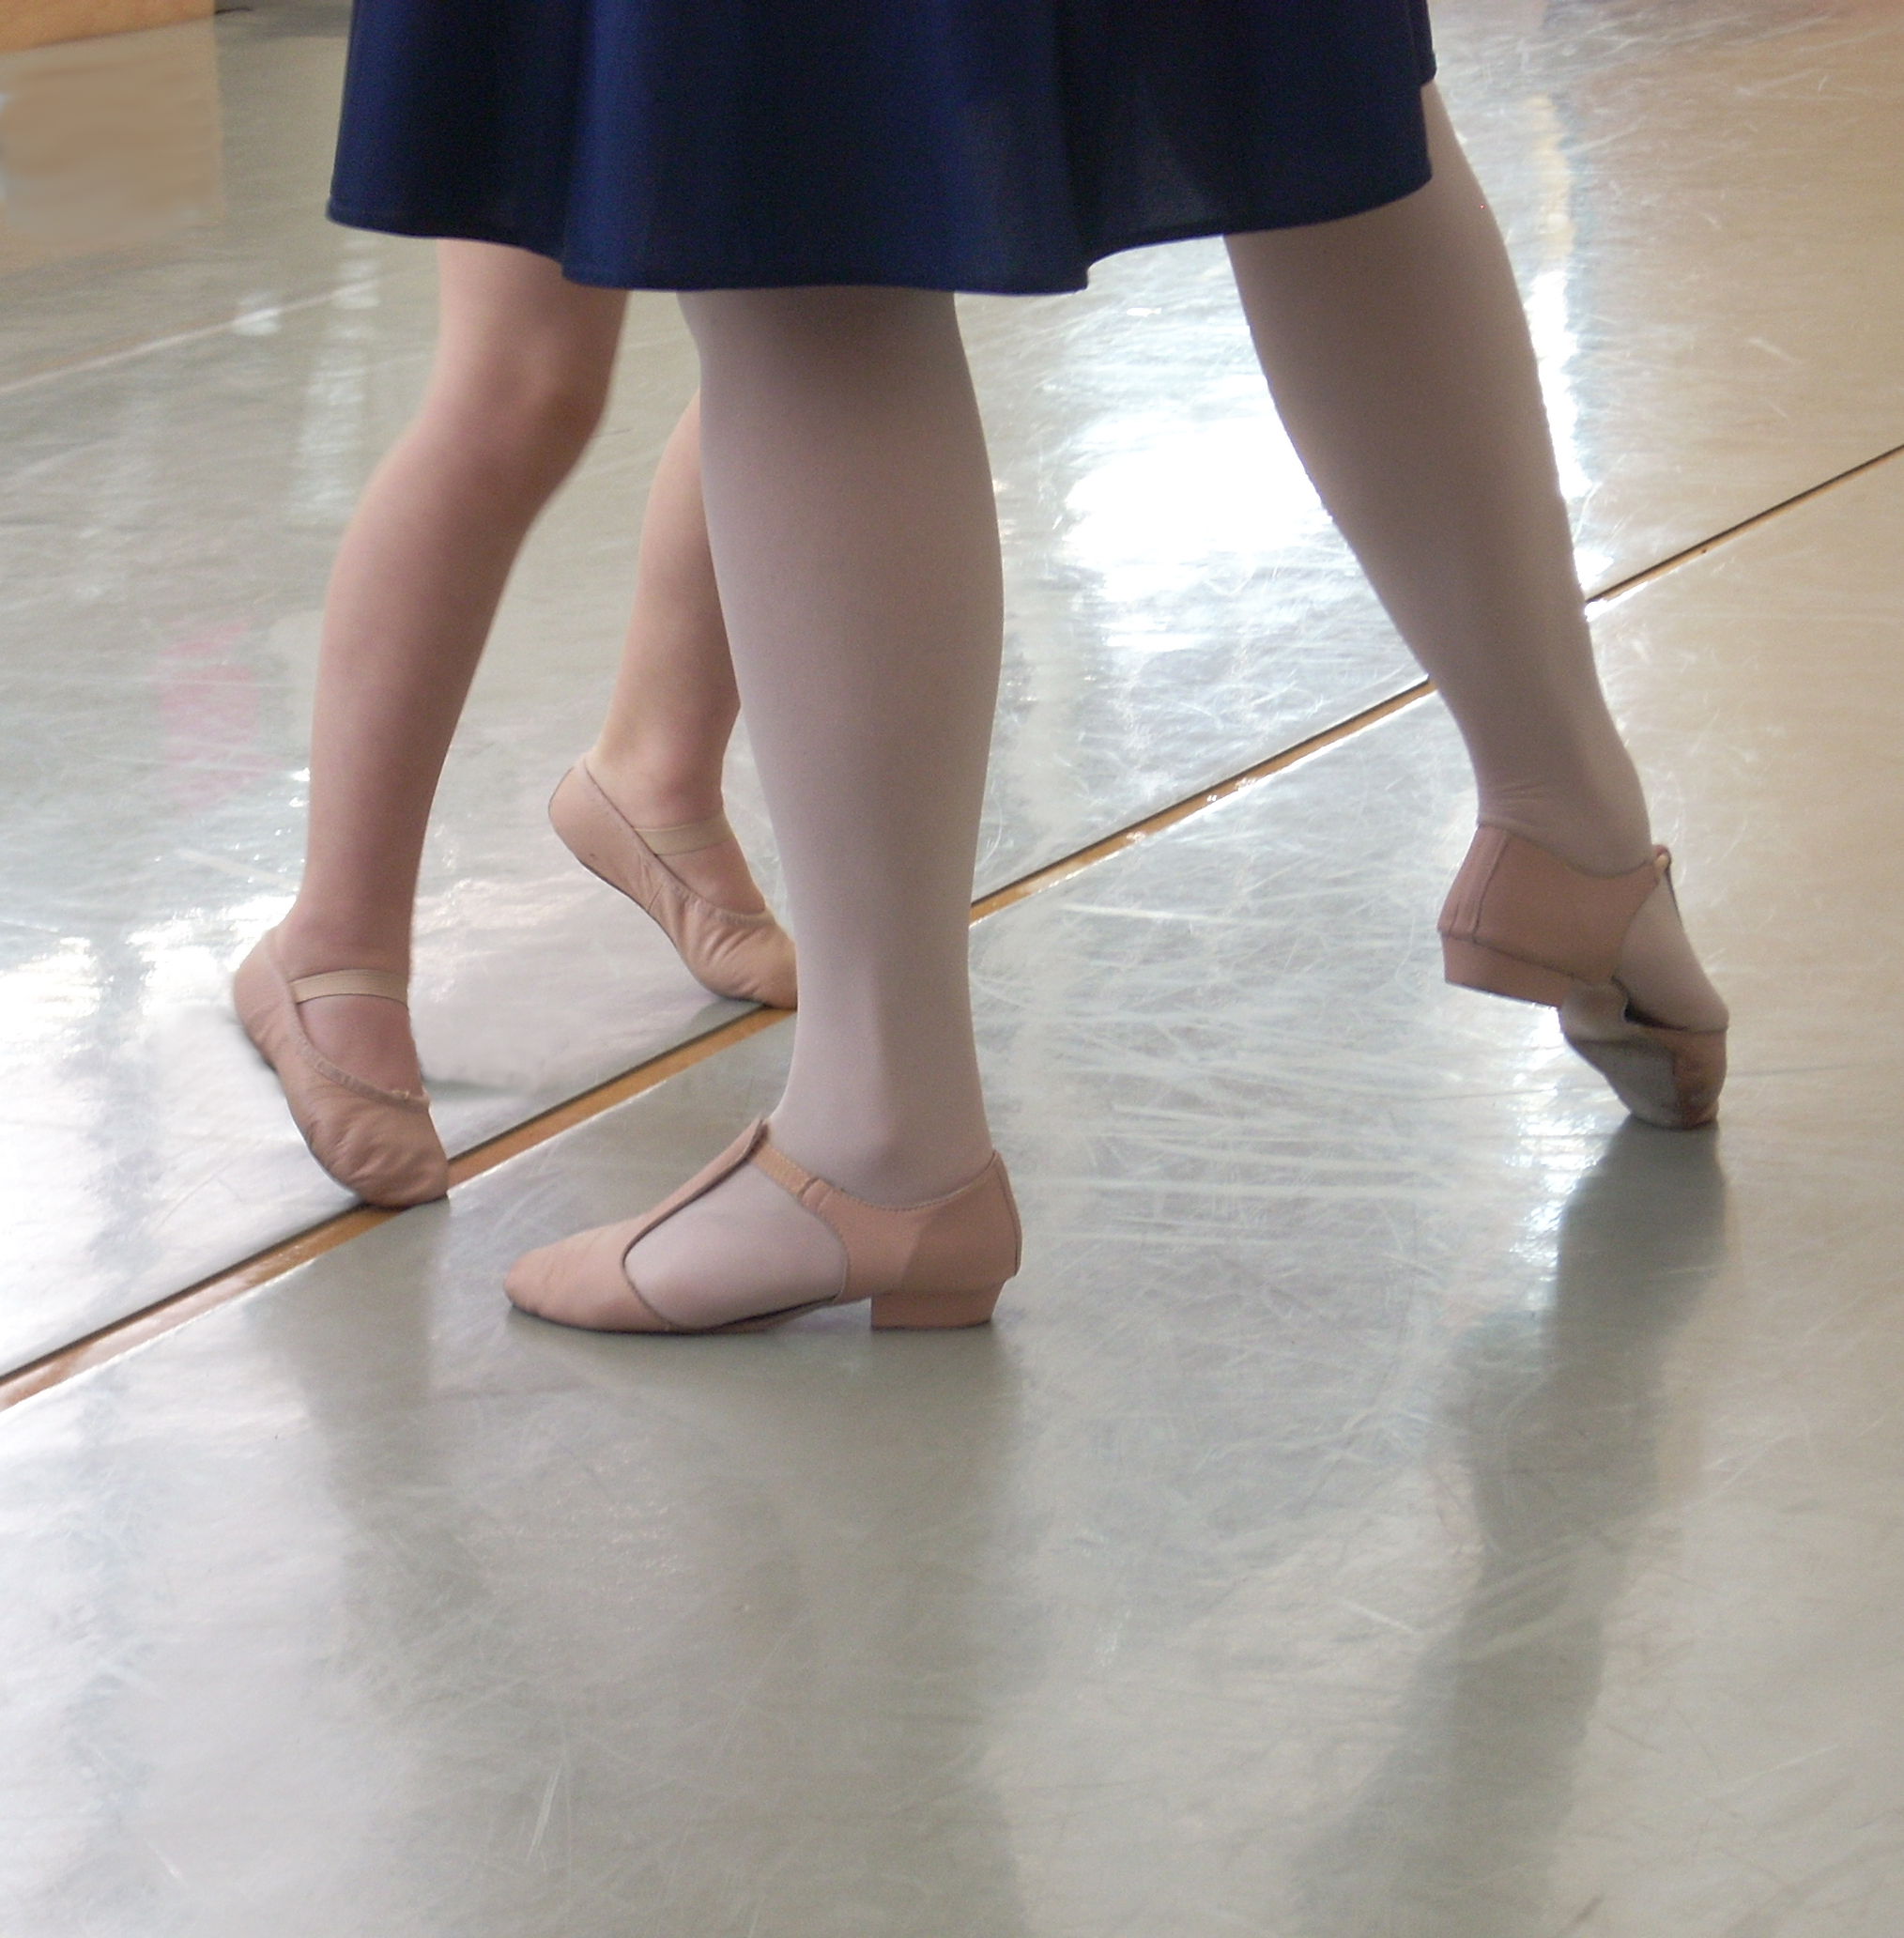 Photo of the feet of an adult showing a young child ballet steps